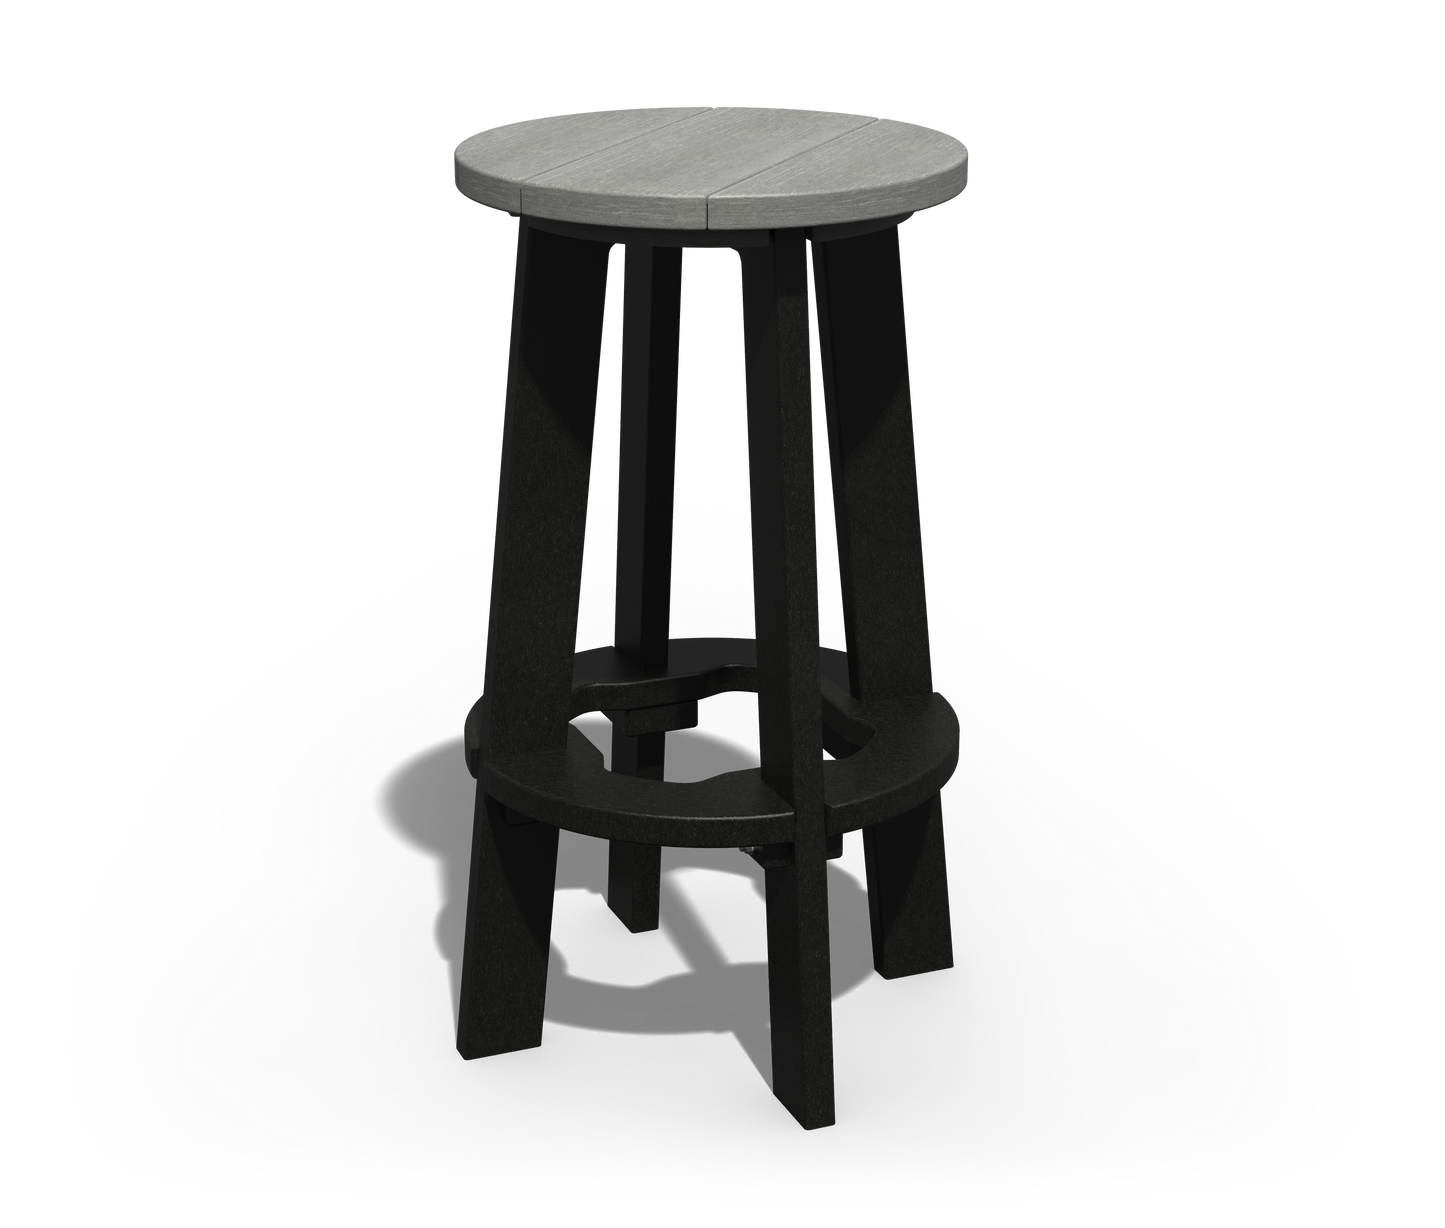 Patiova Recycled Plastic Bar Stool - LEAD TIME TO SHIP 4 WEEKS